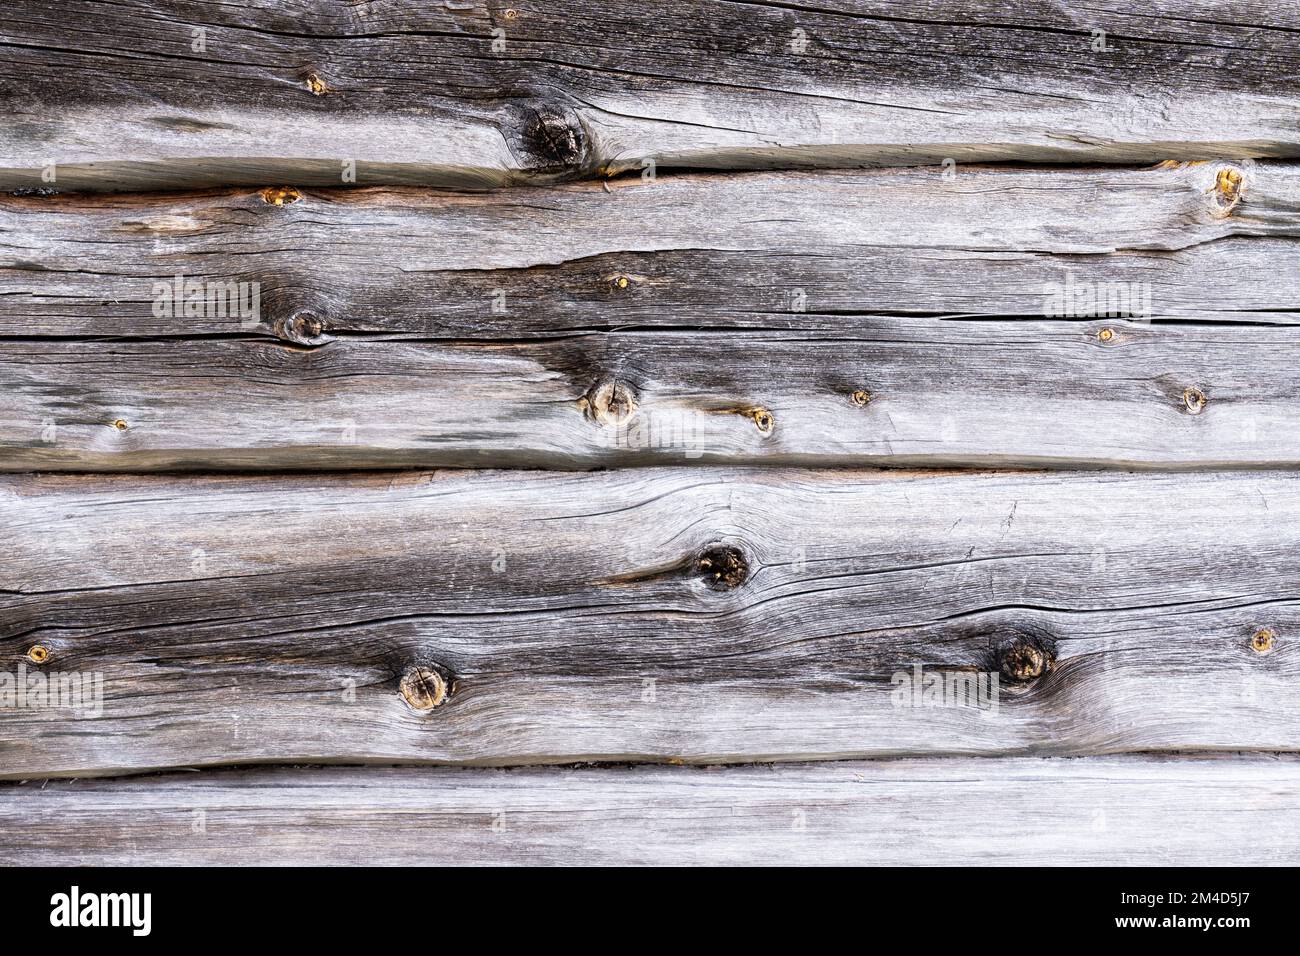 Aged wooden barn beam background with rustic grey wood in Northern Finland Stock Photo